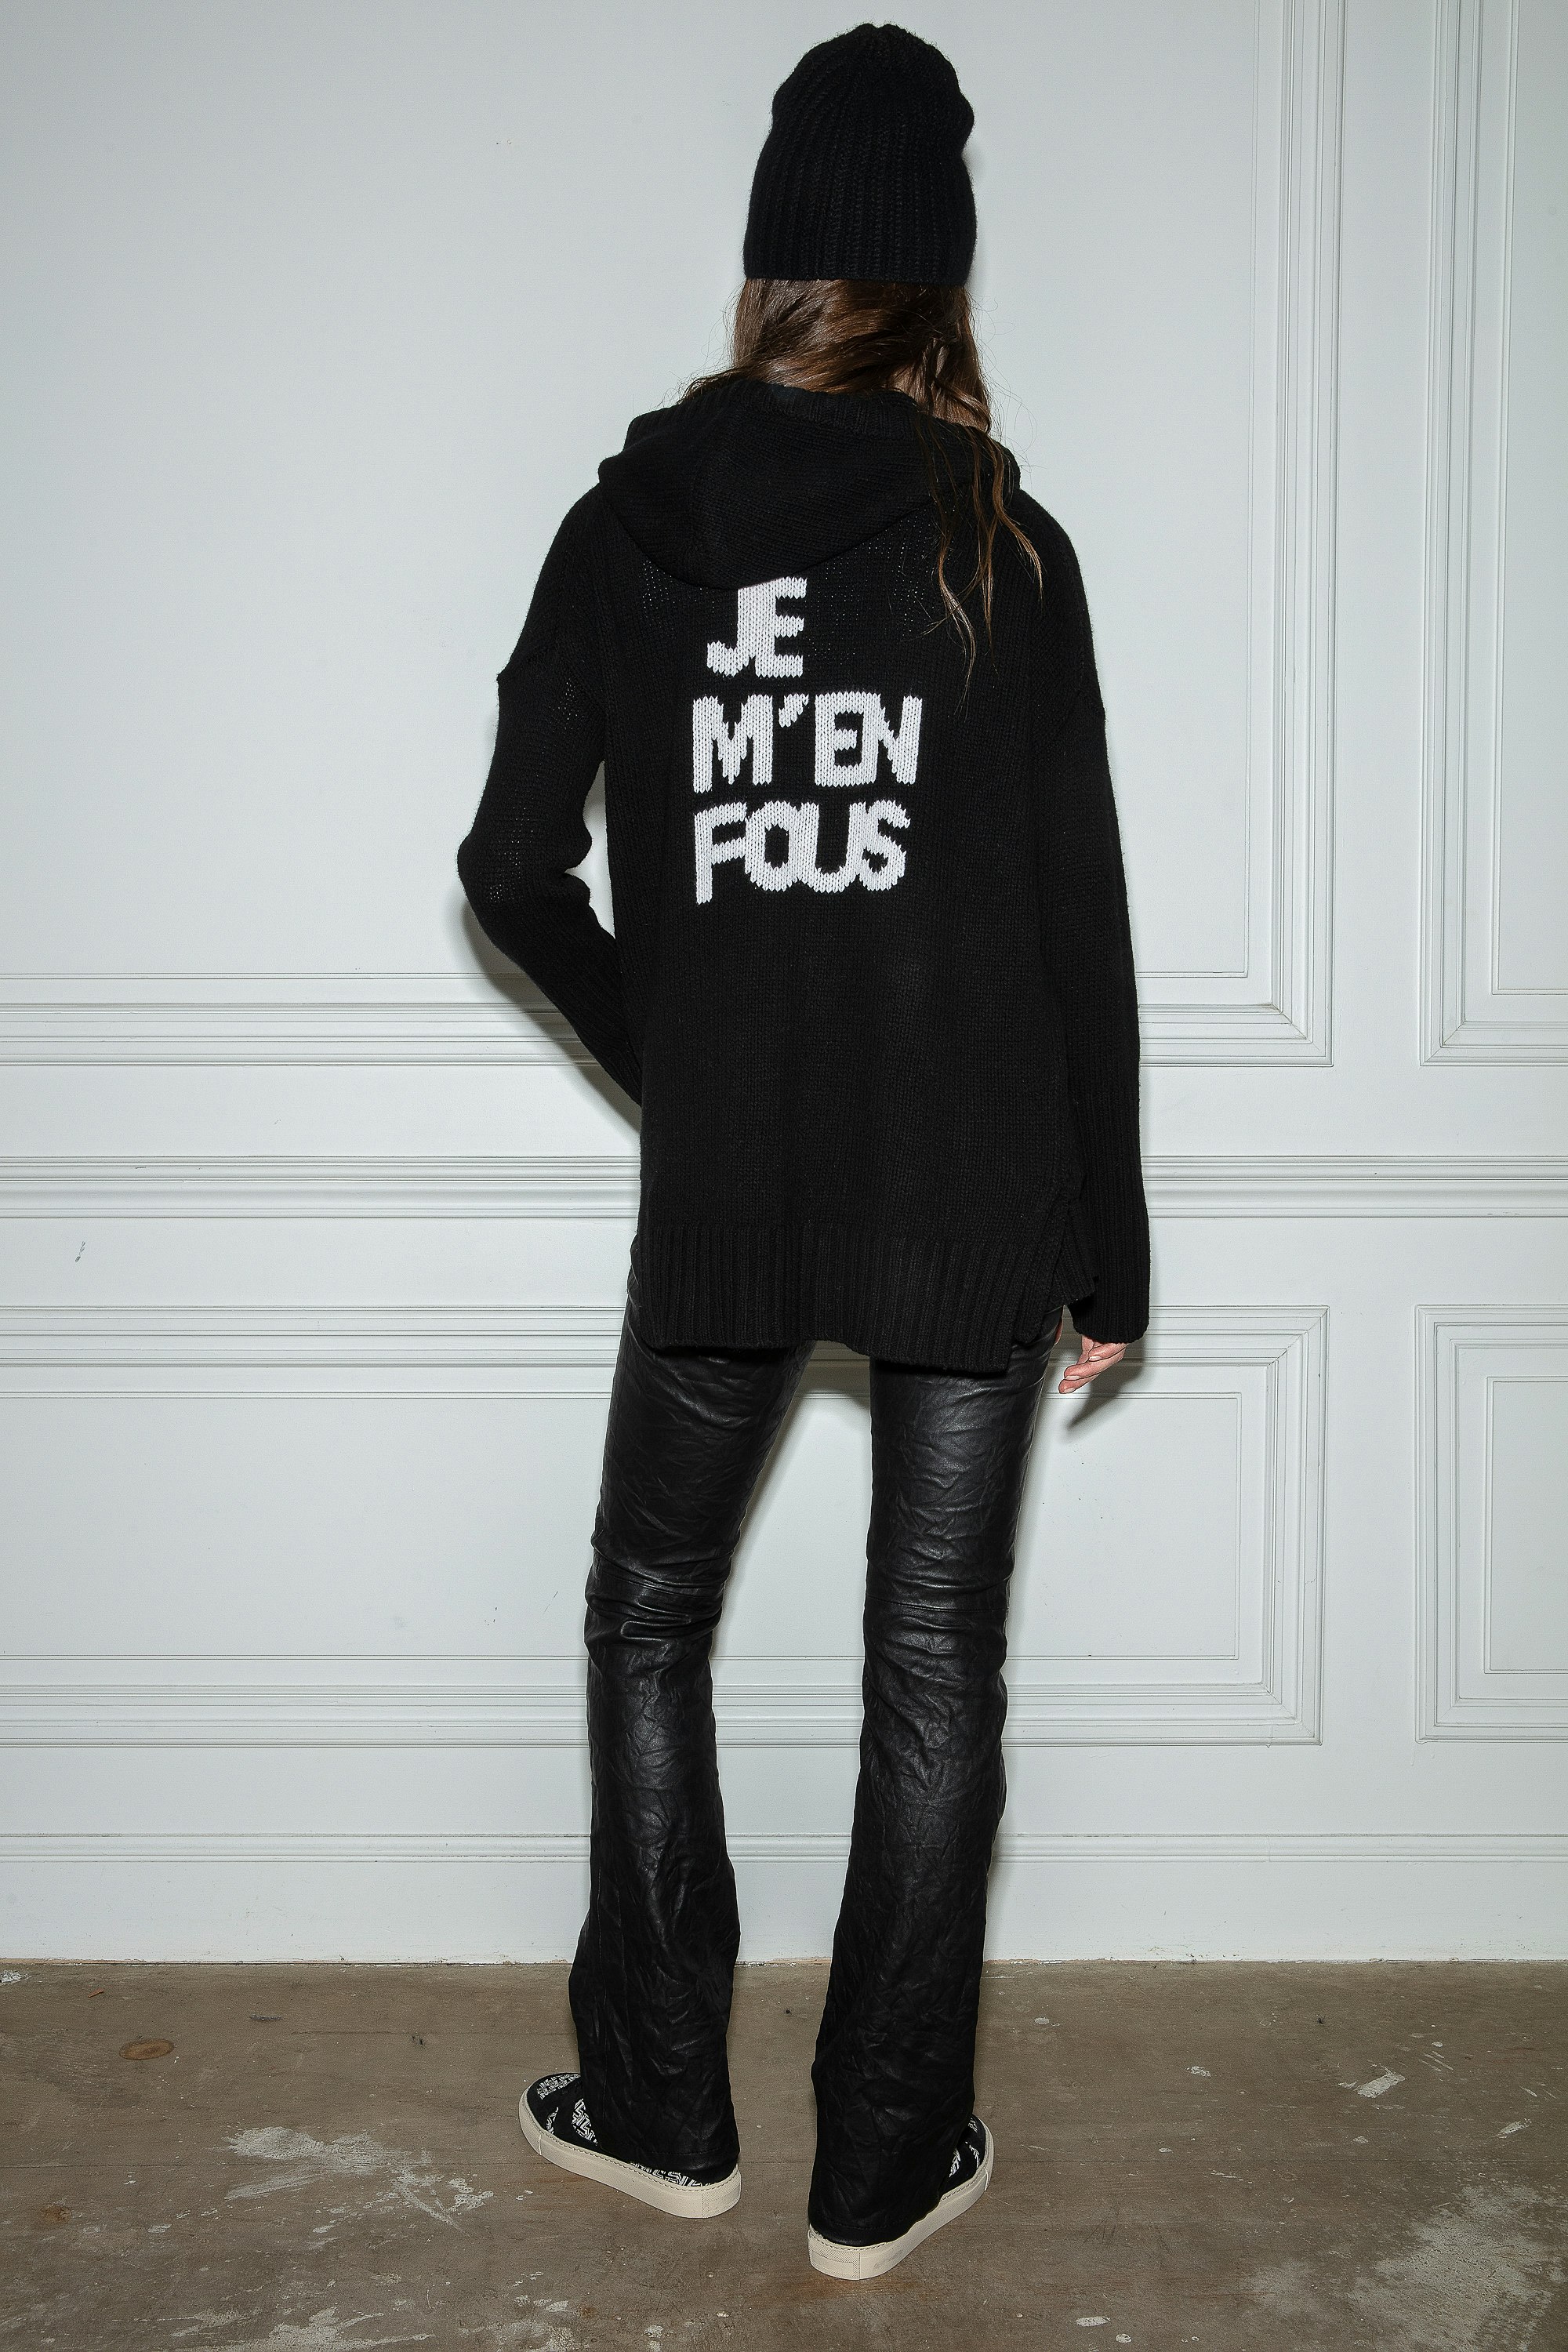 Salma カーディガン Women’s black knit cardigan with zip fastening and hood with the slogan “Je m’en fous” on the back